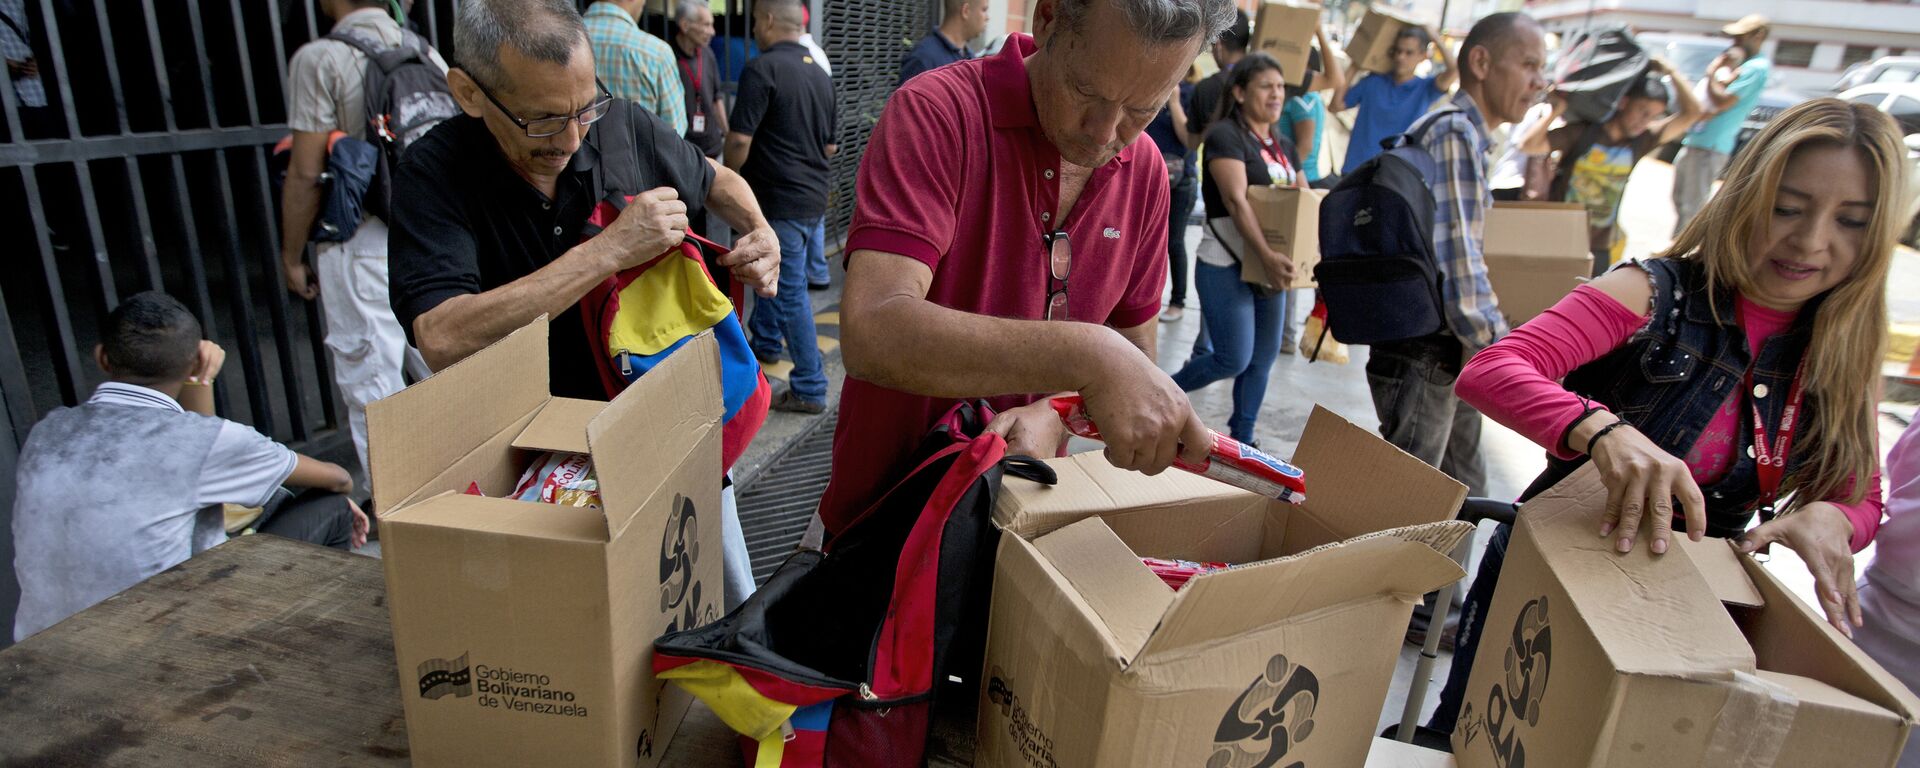 In this July 6, 2018 photo, employees of a government-supported cultural center collect their boxes with subsided food distributed under government program named CLAP in downtown Caracas, Venezuela. Everyone from museum curators to janitors waited in line to sign a clipboard before government loyalists hand over the box of food. - Sputnik International, 1920, 17.06.2021